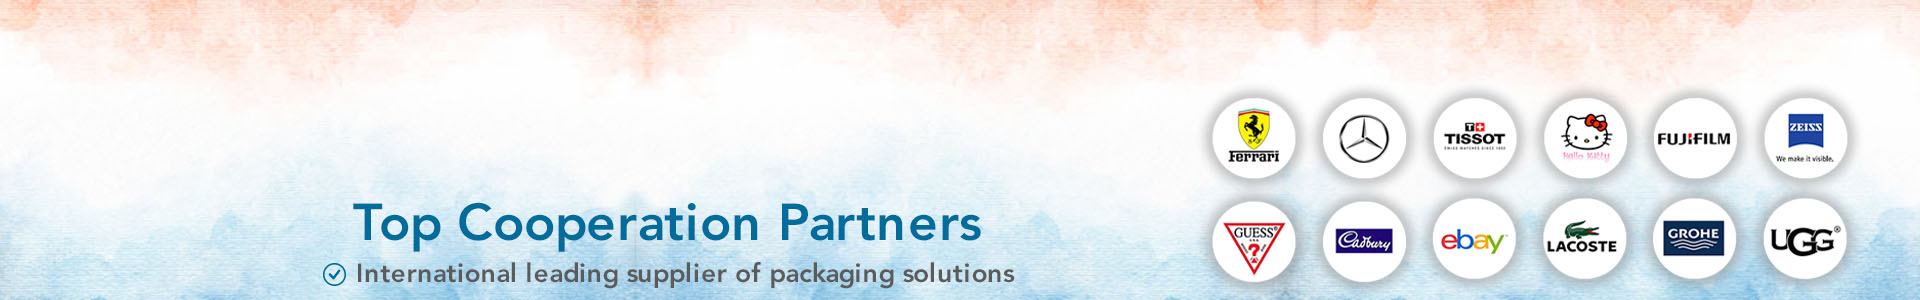 Top Cooperation Partners